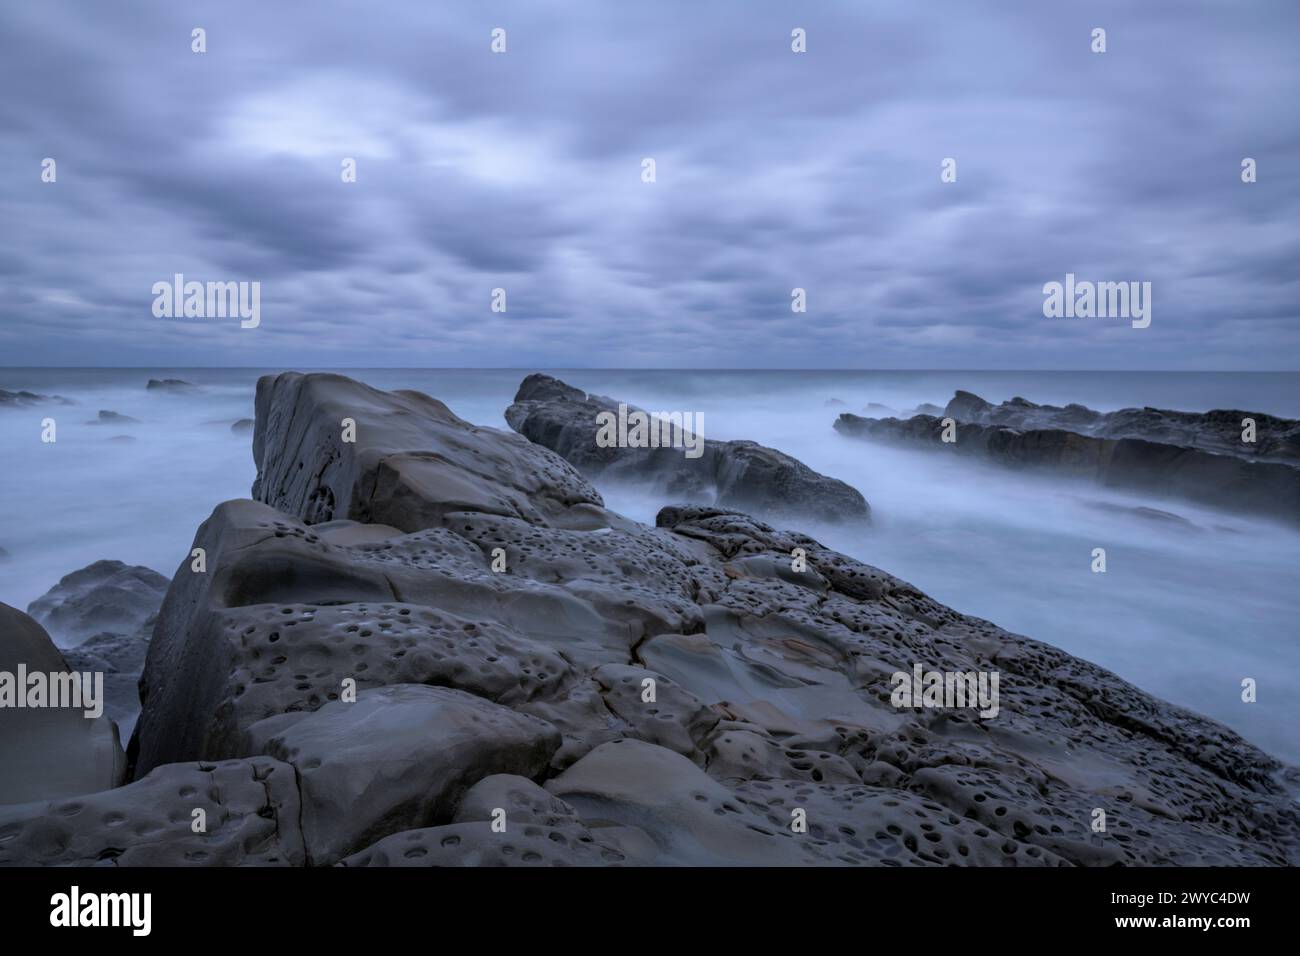 Mystical atmosphere with smooth, weathered rocks on a rough coastline, under an overcast sky Stock Photo